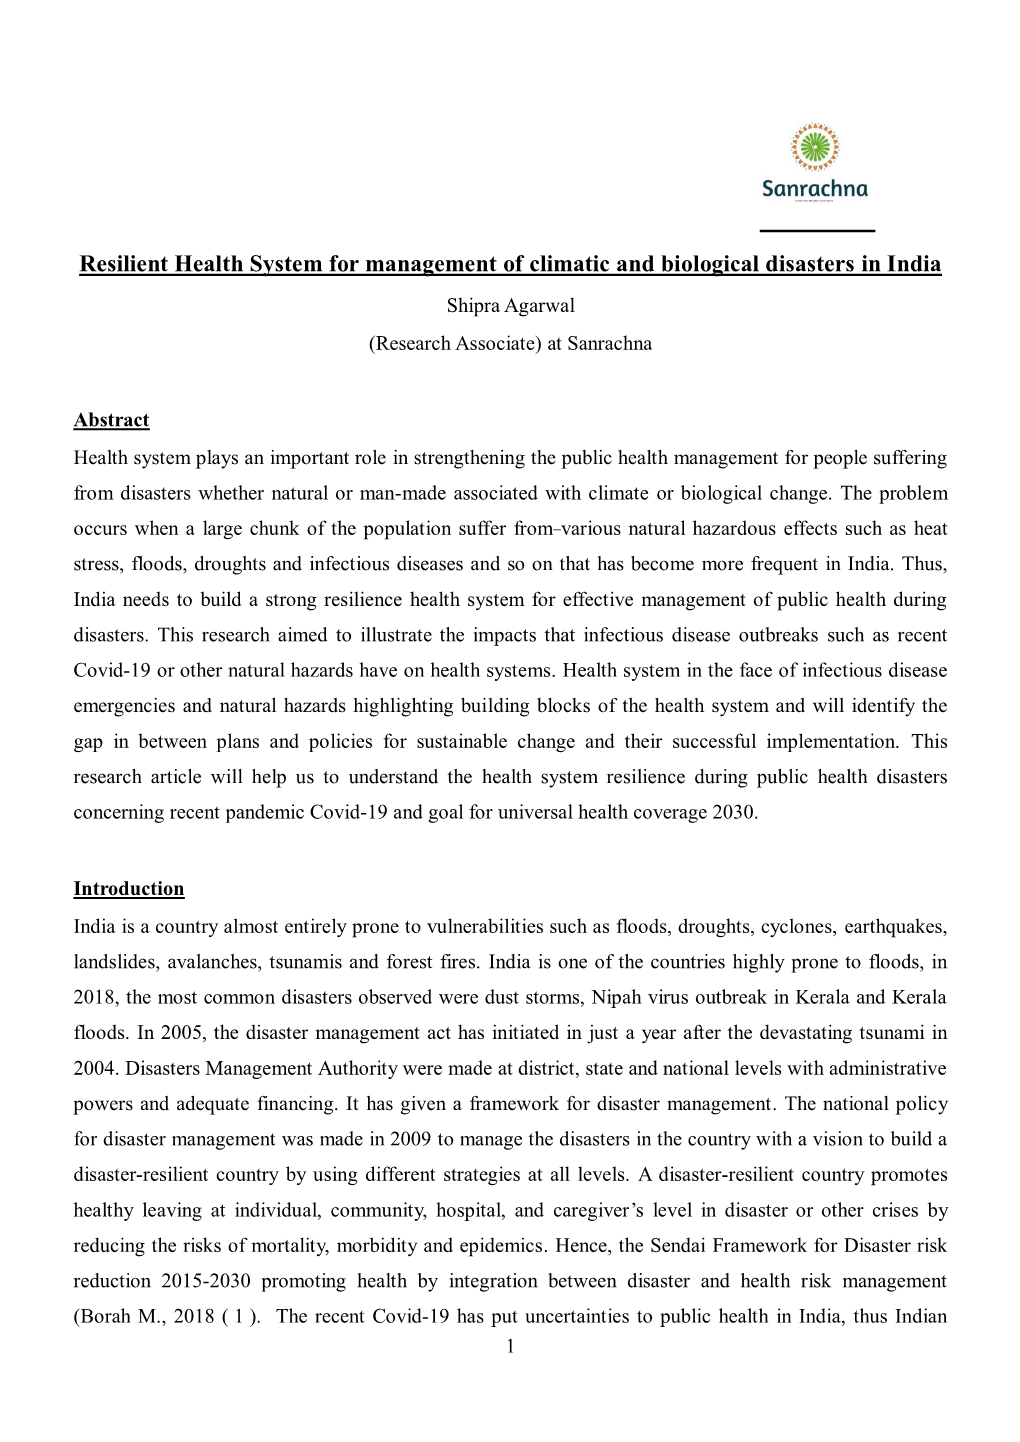 Resilient Health System for Management of Climatic and Biological Disasters in India Shipra Agarwal (Research Associate) at Sanrachna